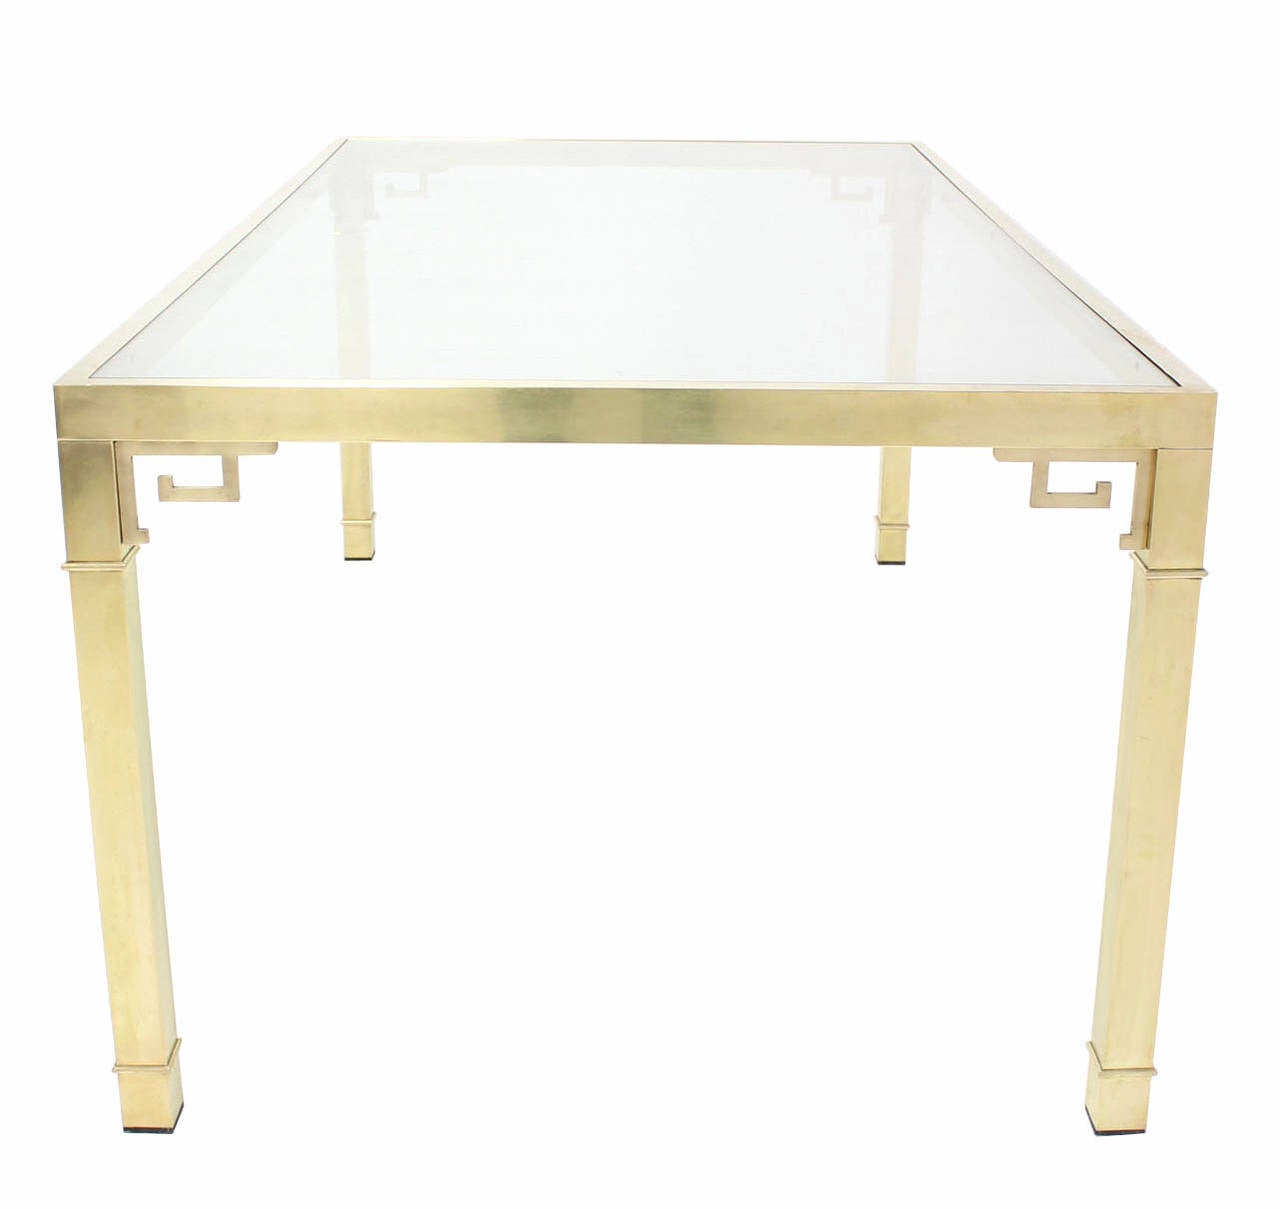 American Solid Brass Greek Key Design Dining Table by Mastercraft